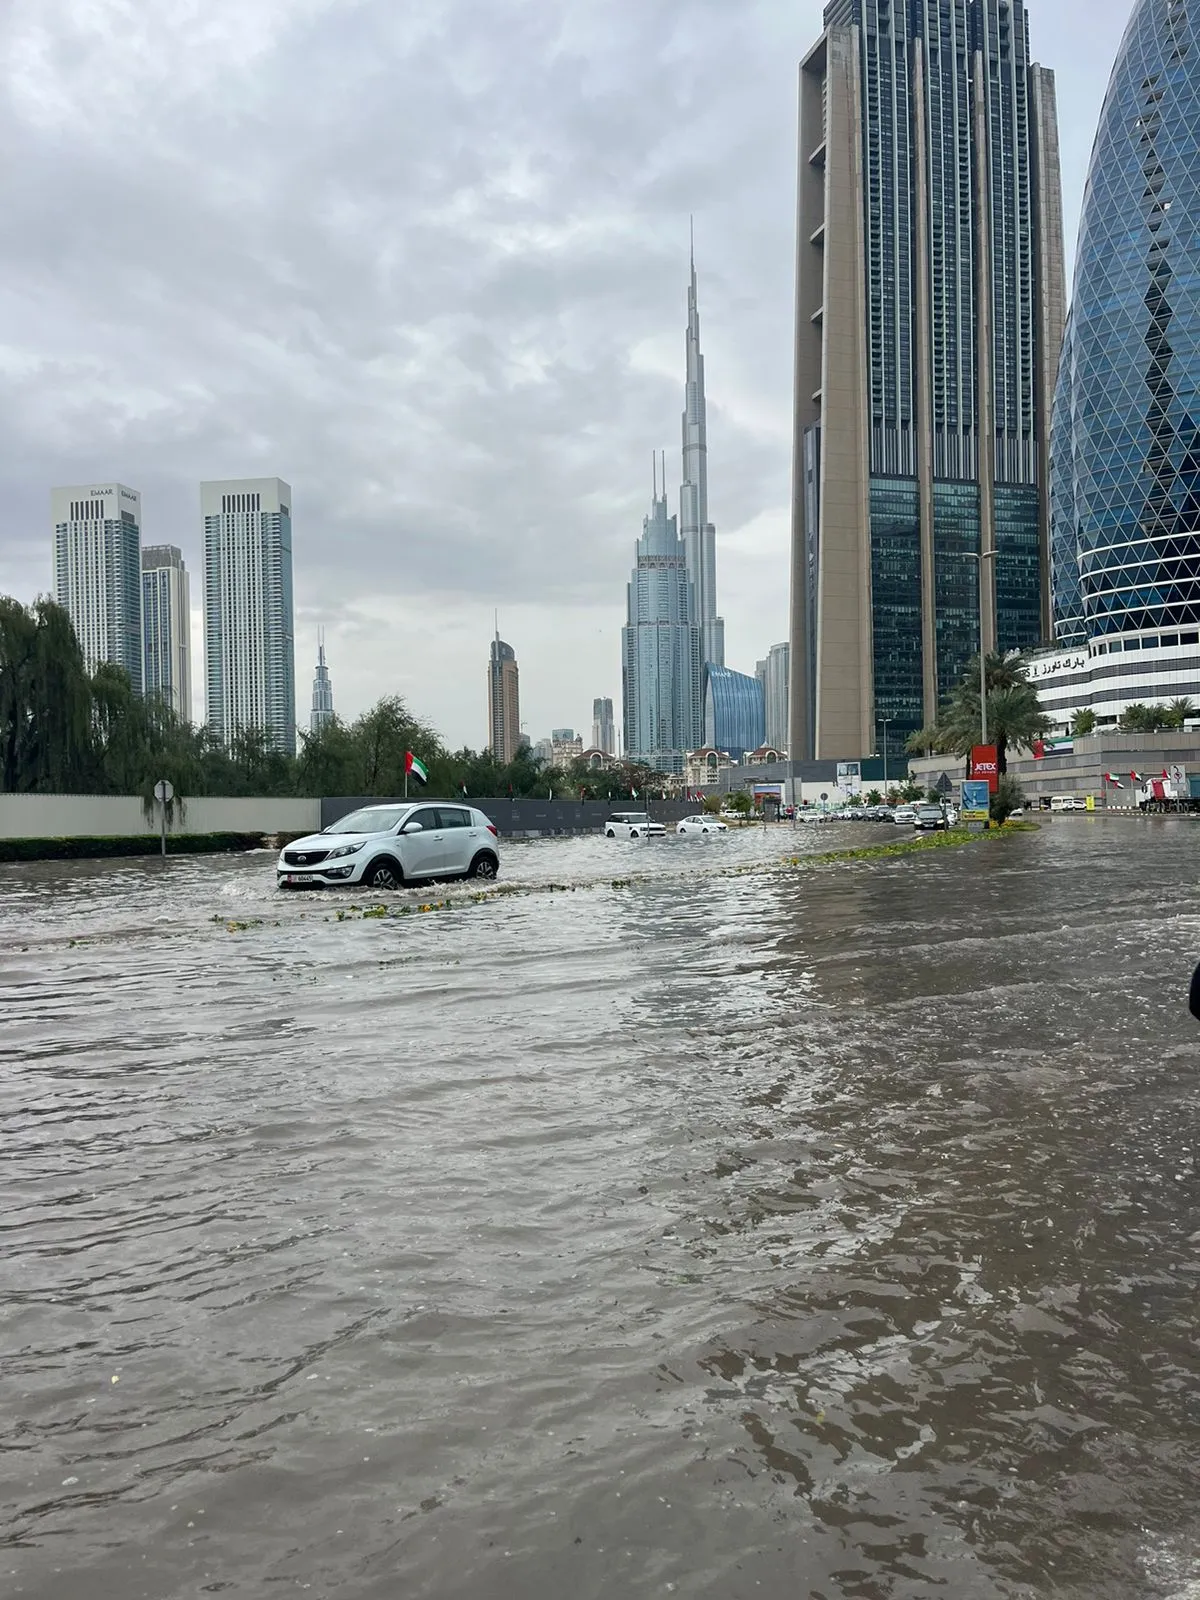 Unpredictable Weather in UAE, Dubai and other cities with heavy rainfall.